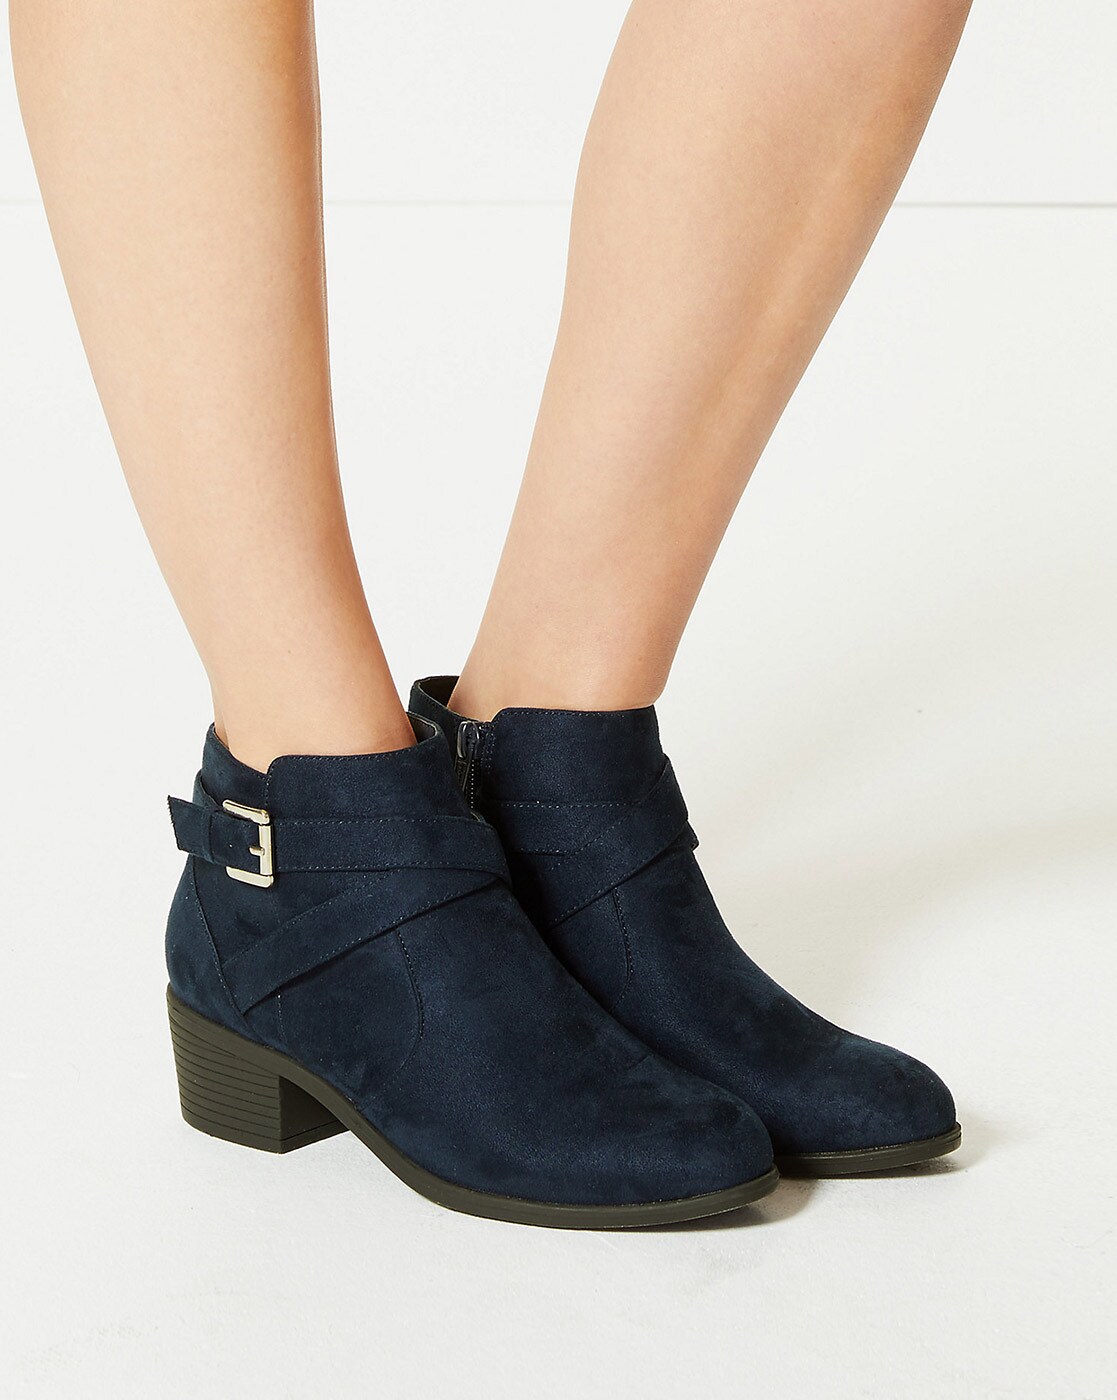 marks and spencer buckle boots